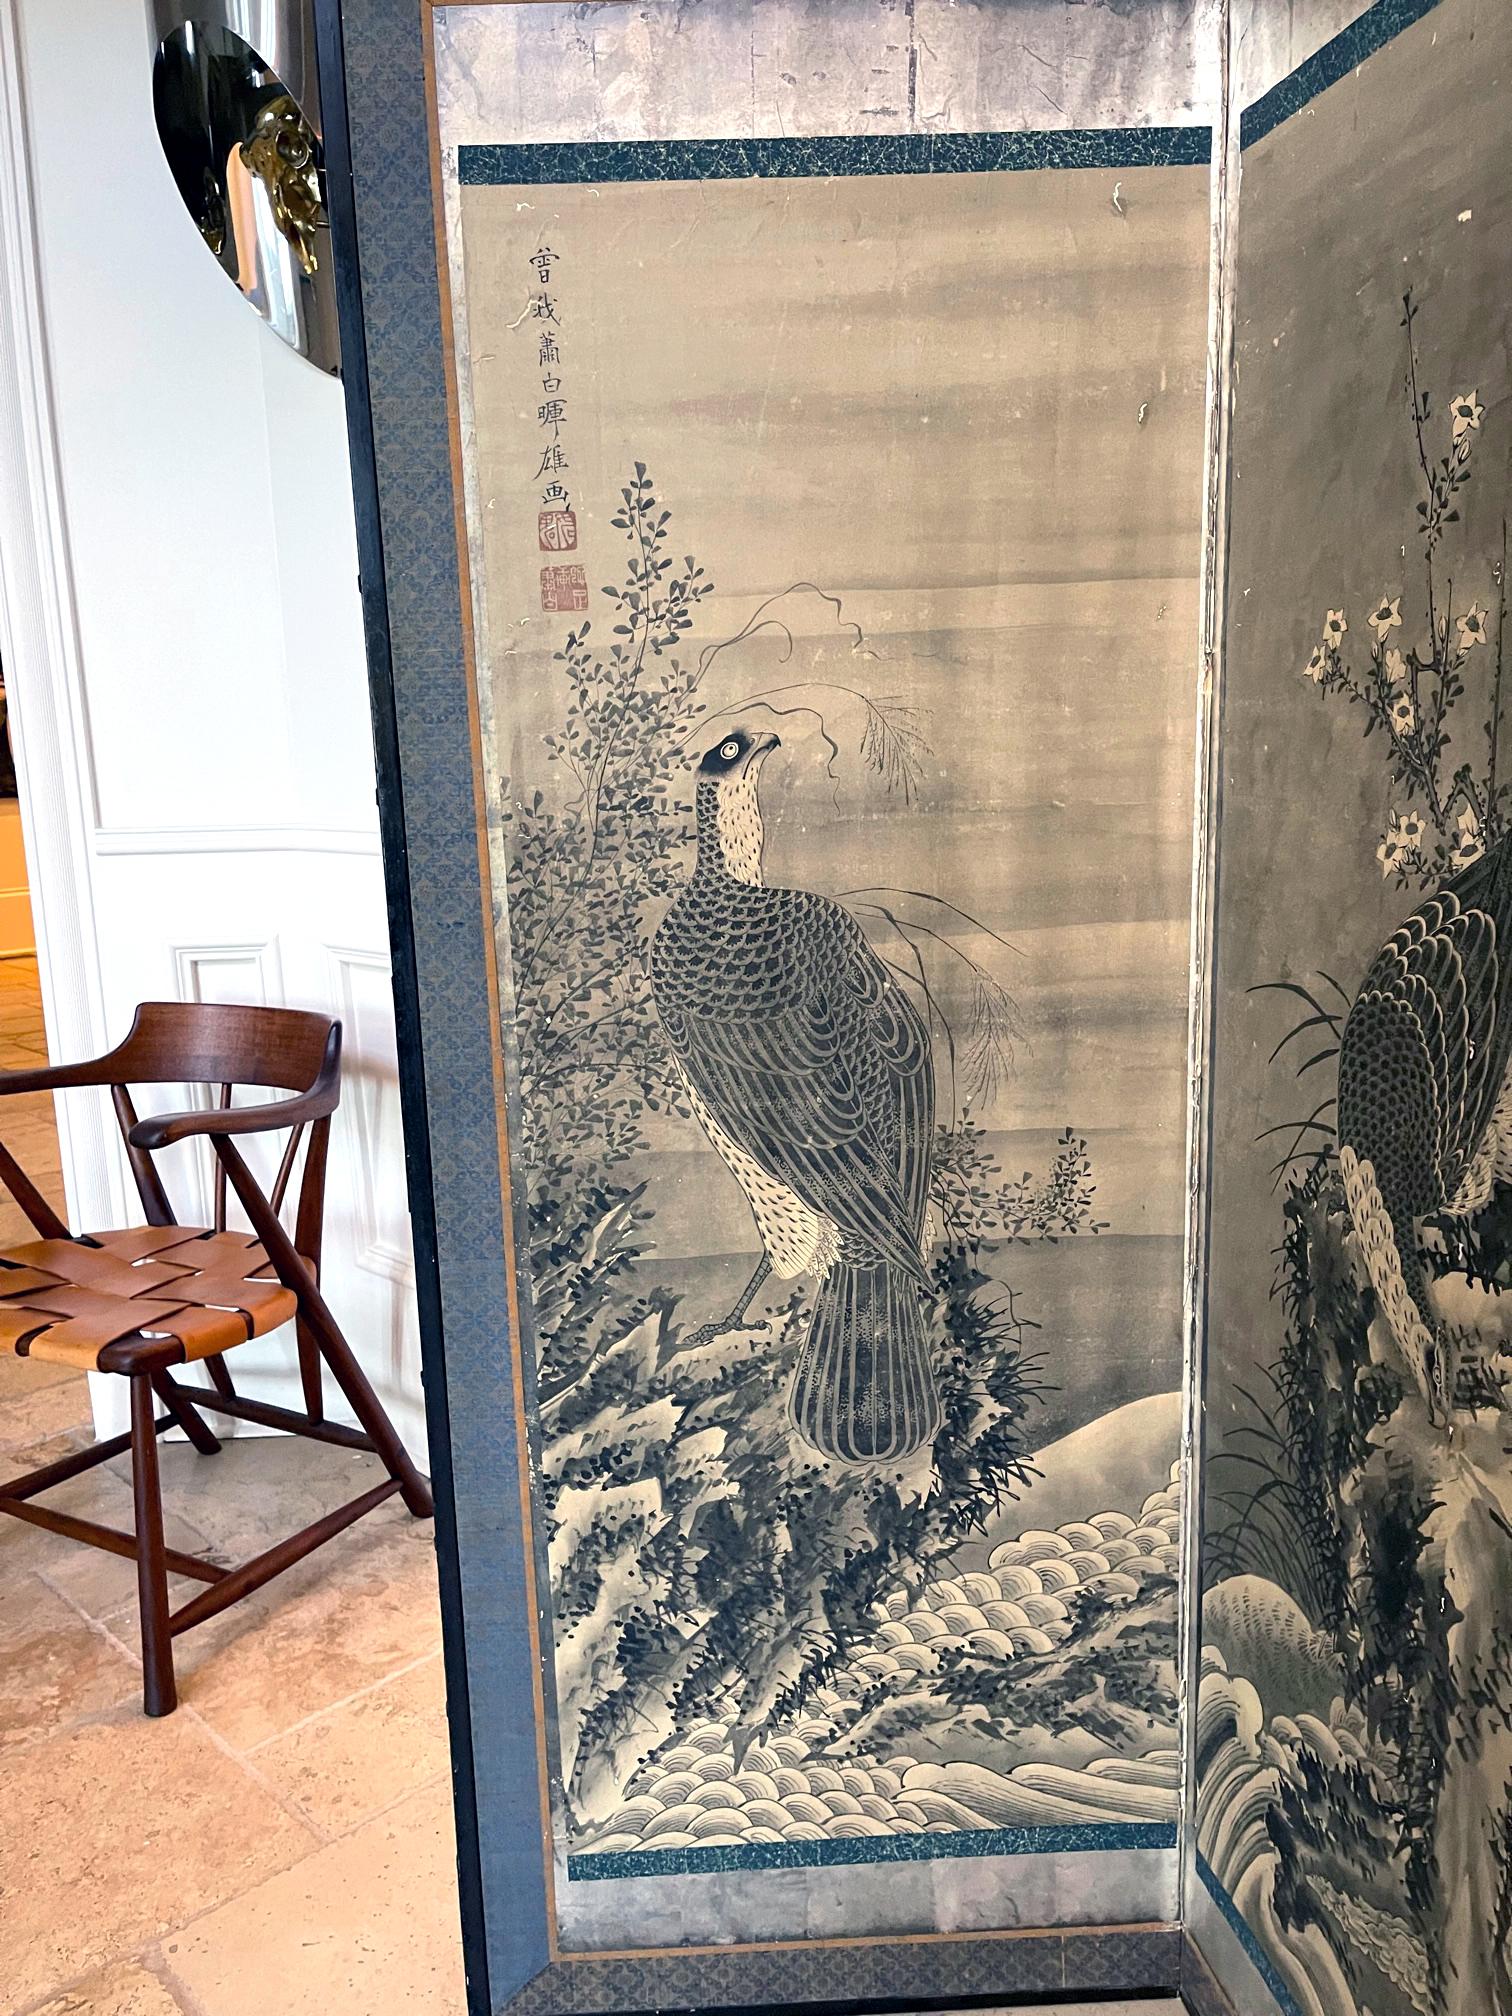 A rare six-panel Japanese folding floor screen (Byōbu) by Soga Shōhaku (1730-1781) from Edo period. The screen depicts six perched hawk-eagles in various poses positioned in a literary landscape composed of plants, flowers, trees, rocks and all